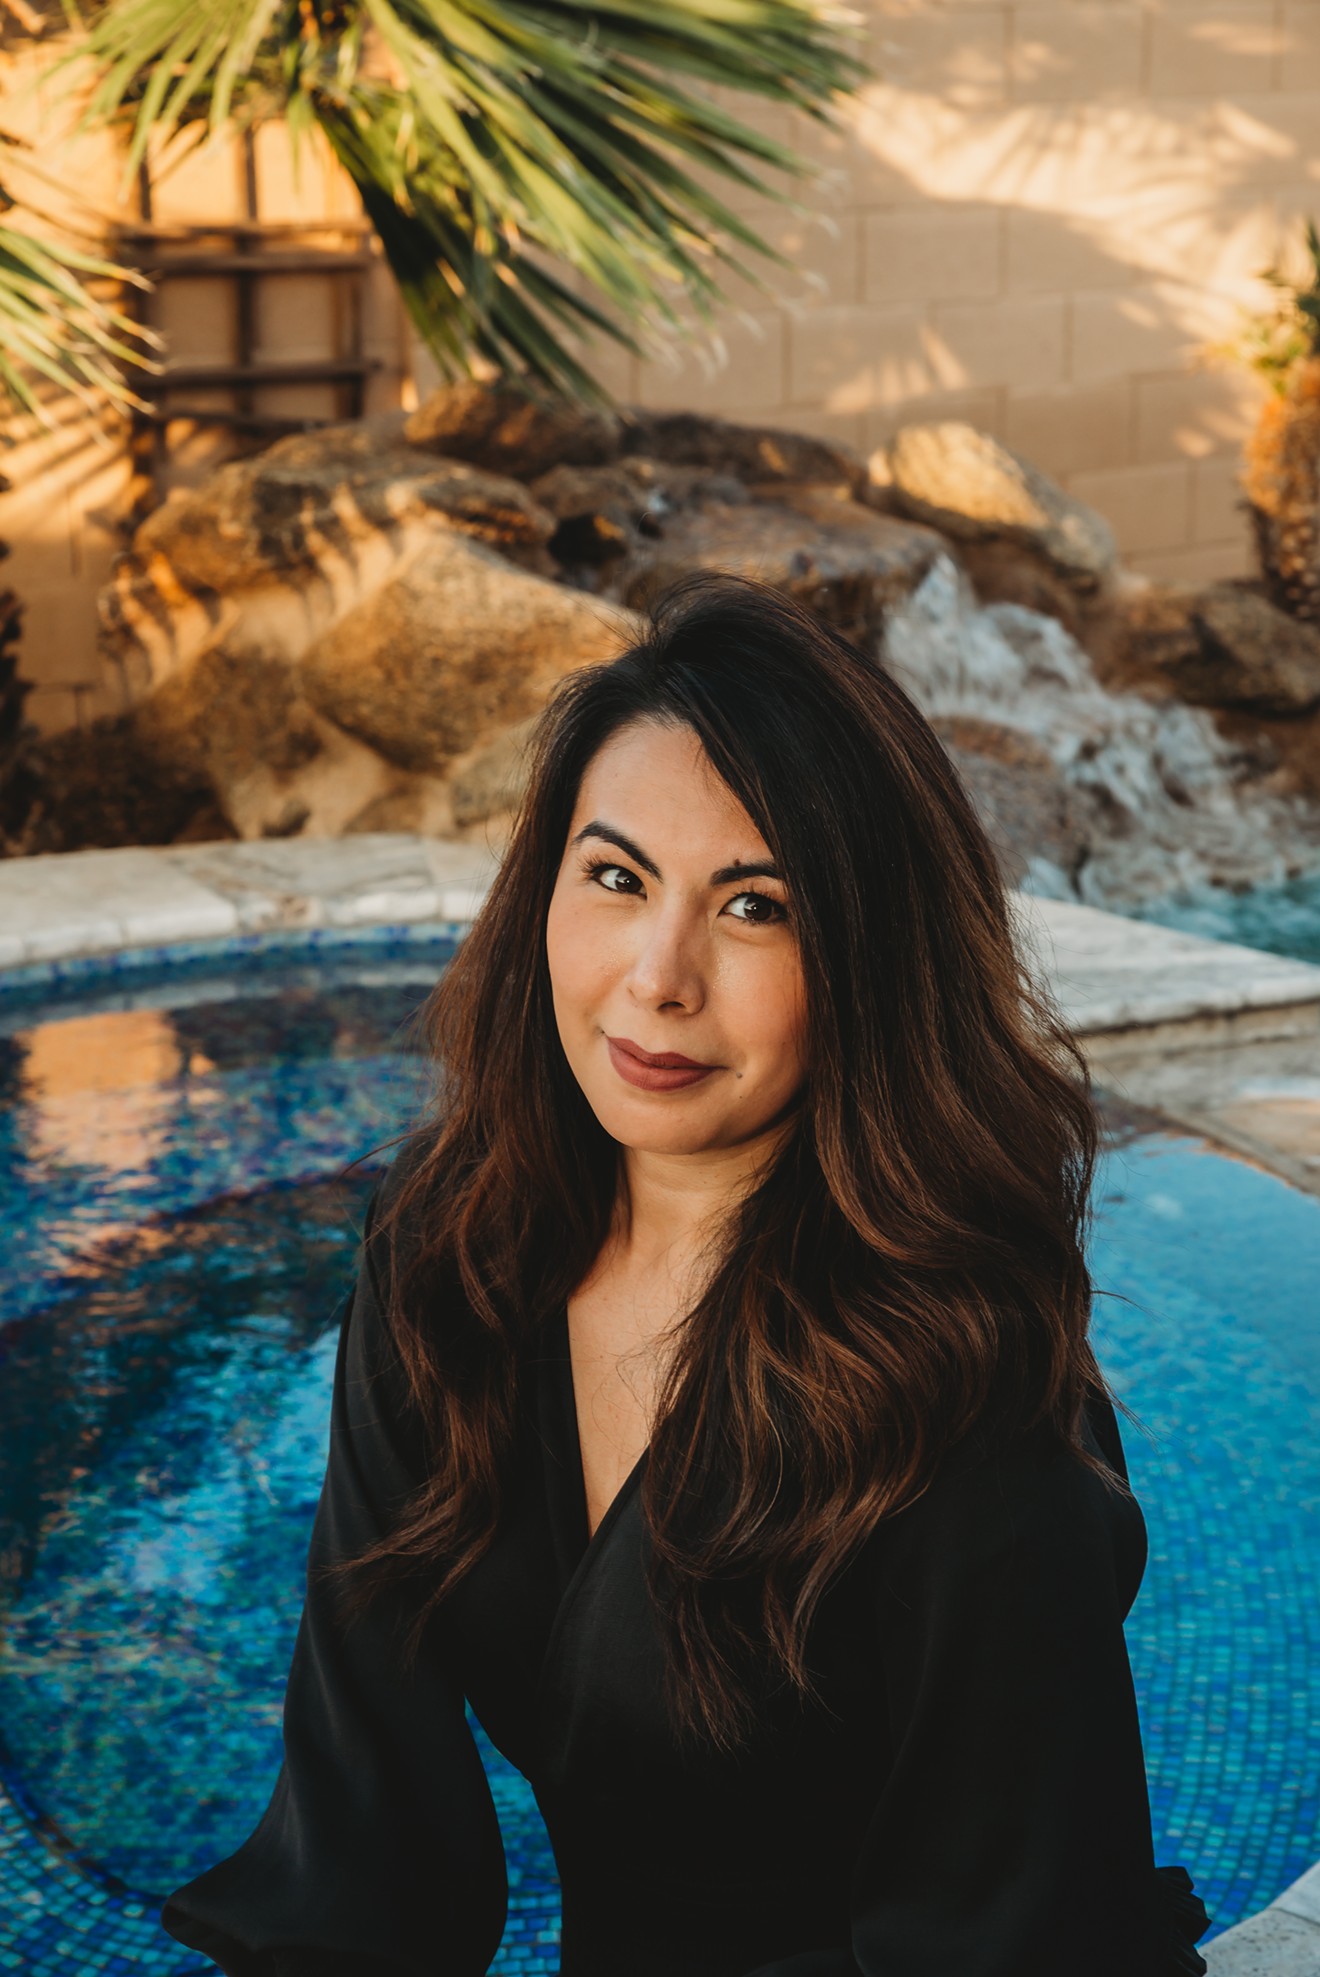 Shannon Carlson: "At the time, it was important to change my address to Arizona for tax purposes, my real estate license, and associate with being a local in my new city."